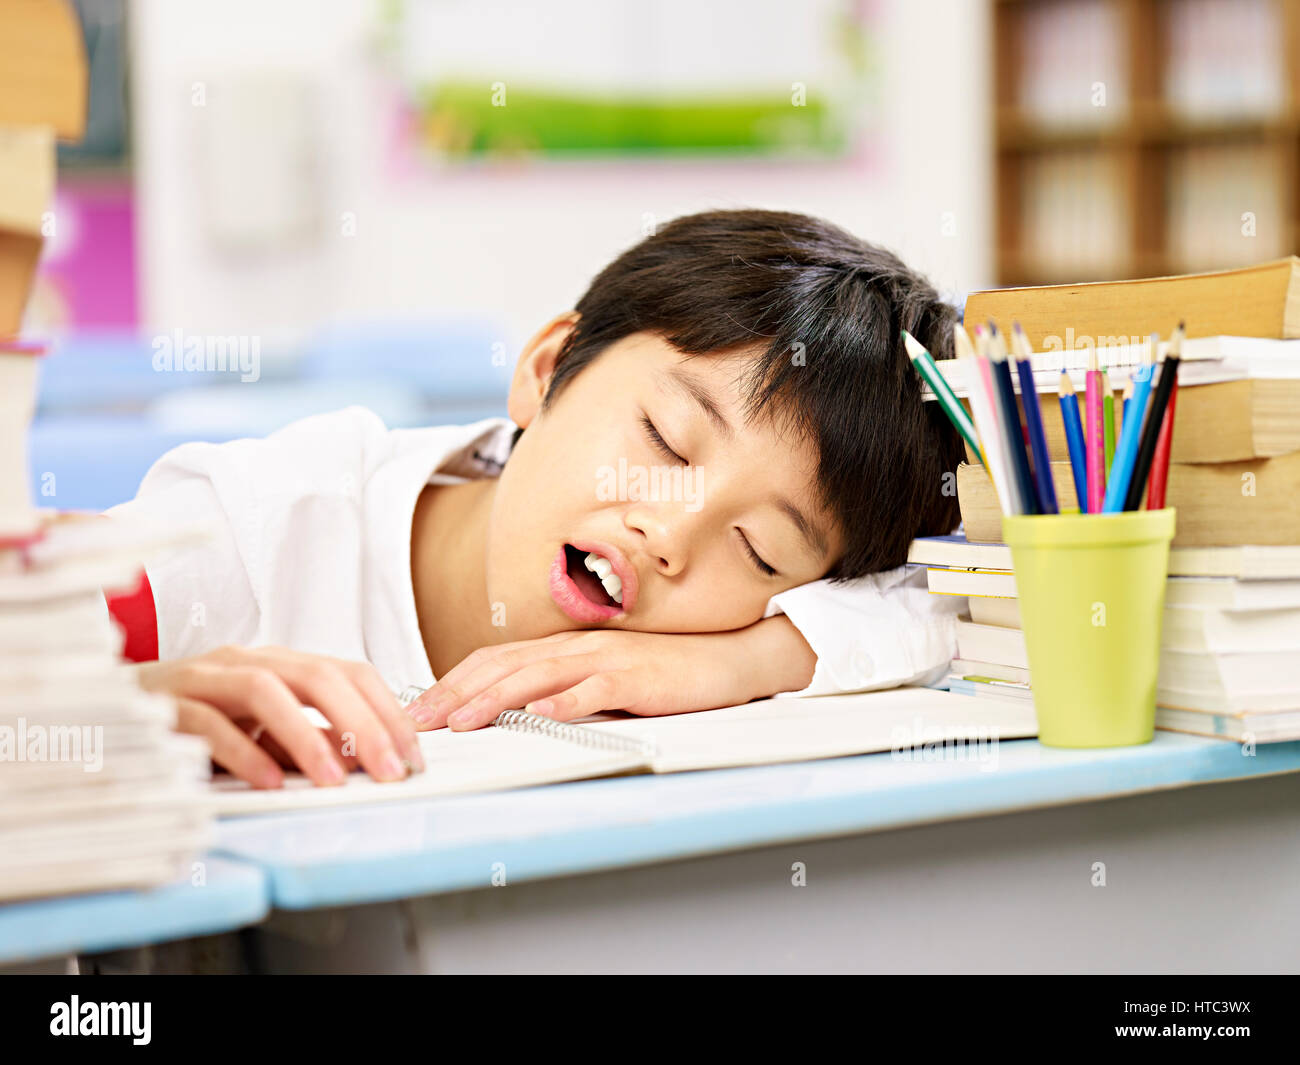 tired and exhausted asian primary school student falling asleep while studying Stock Photo